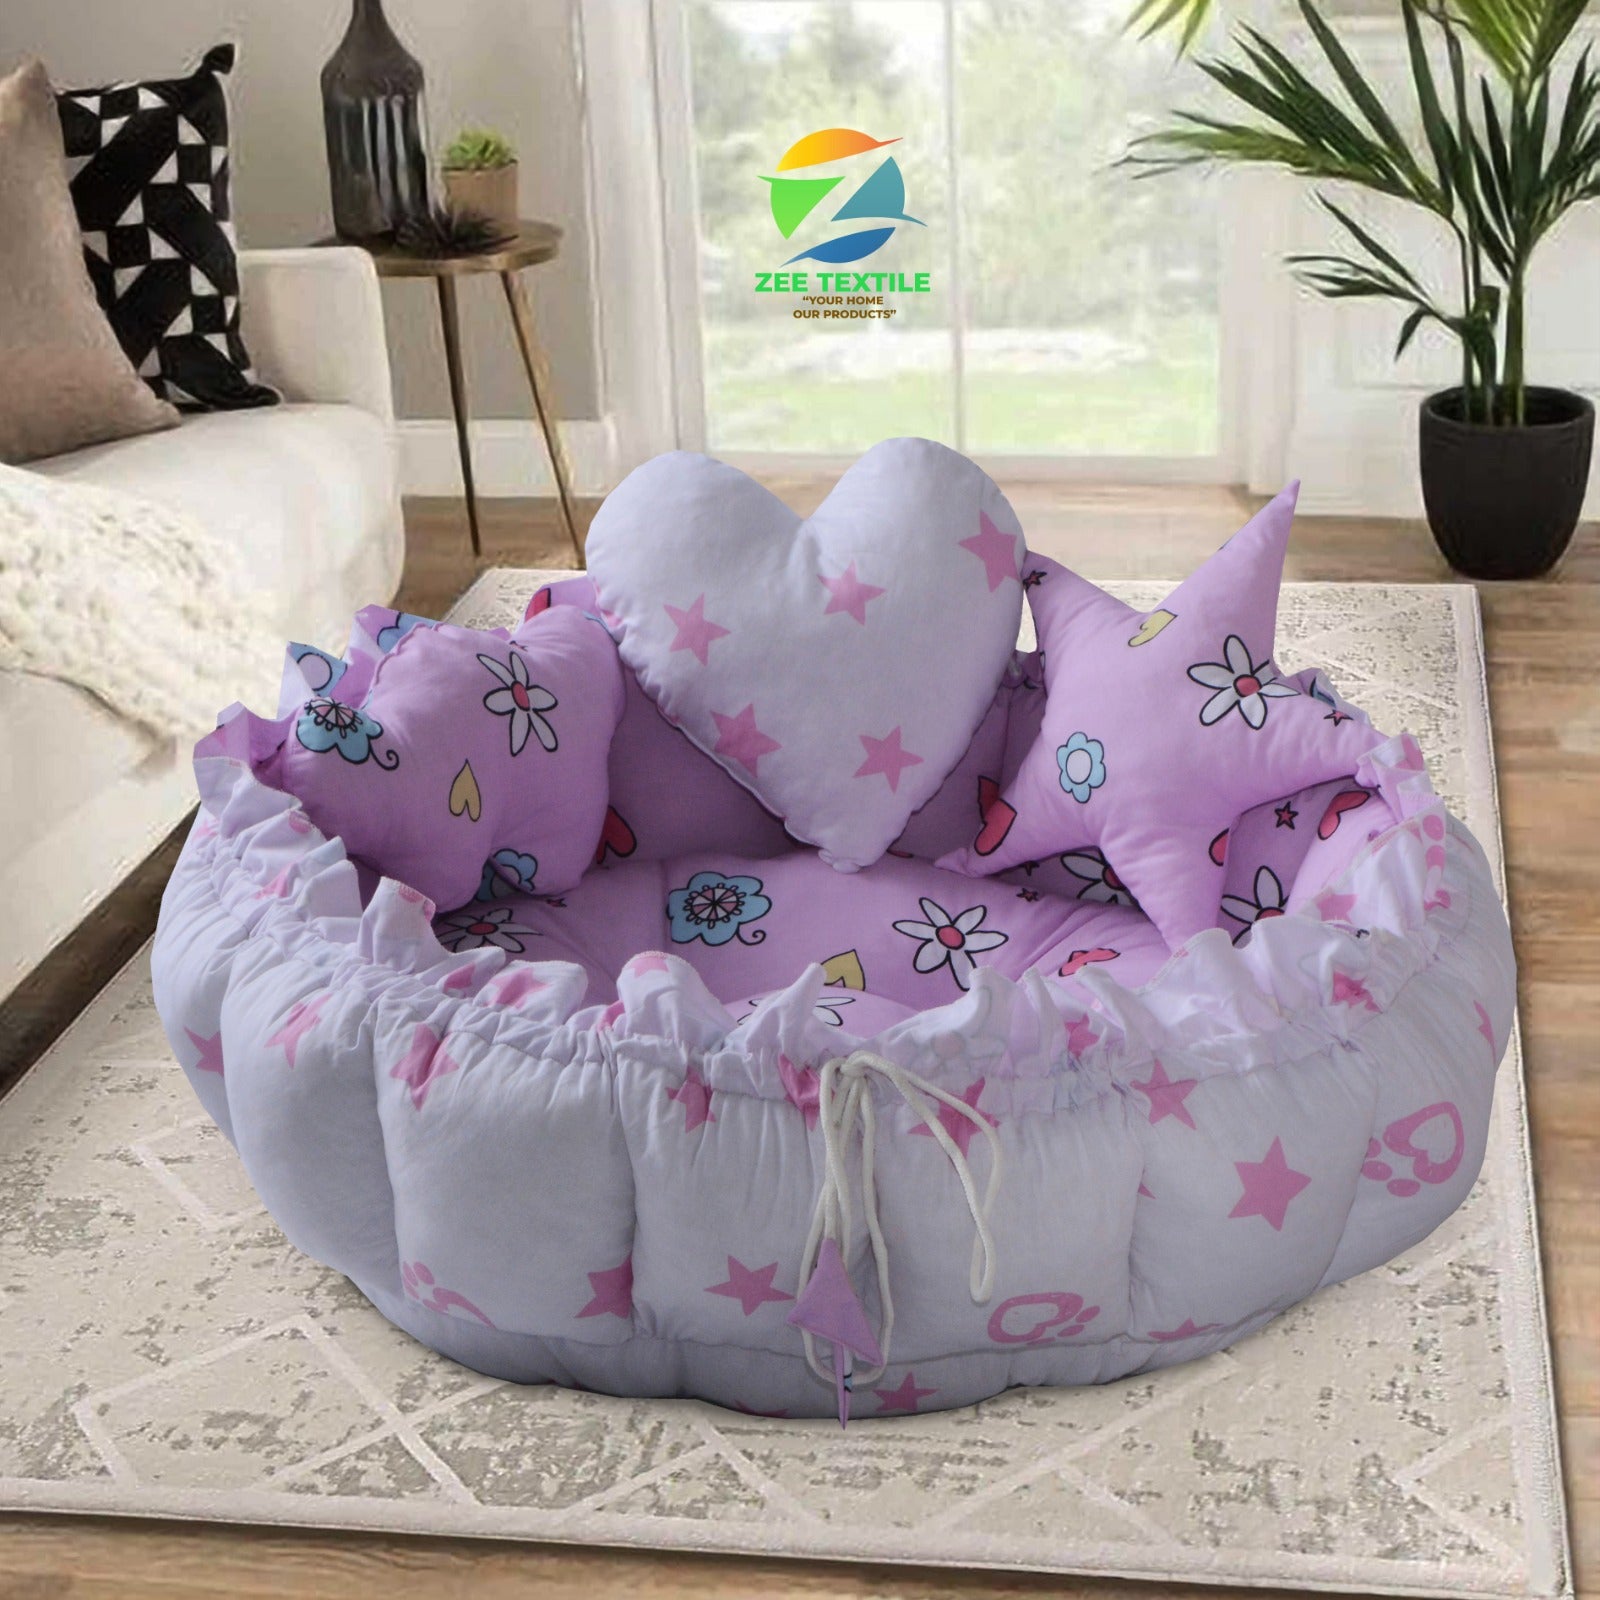 Printed Two Sided Baby Playing Cot, 5 pcs with Mosquito net